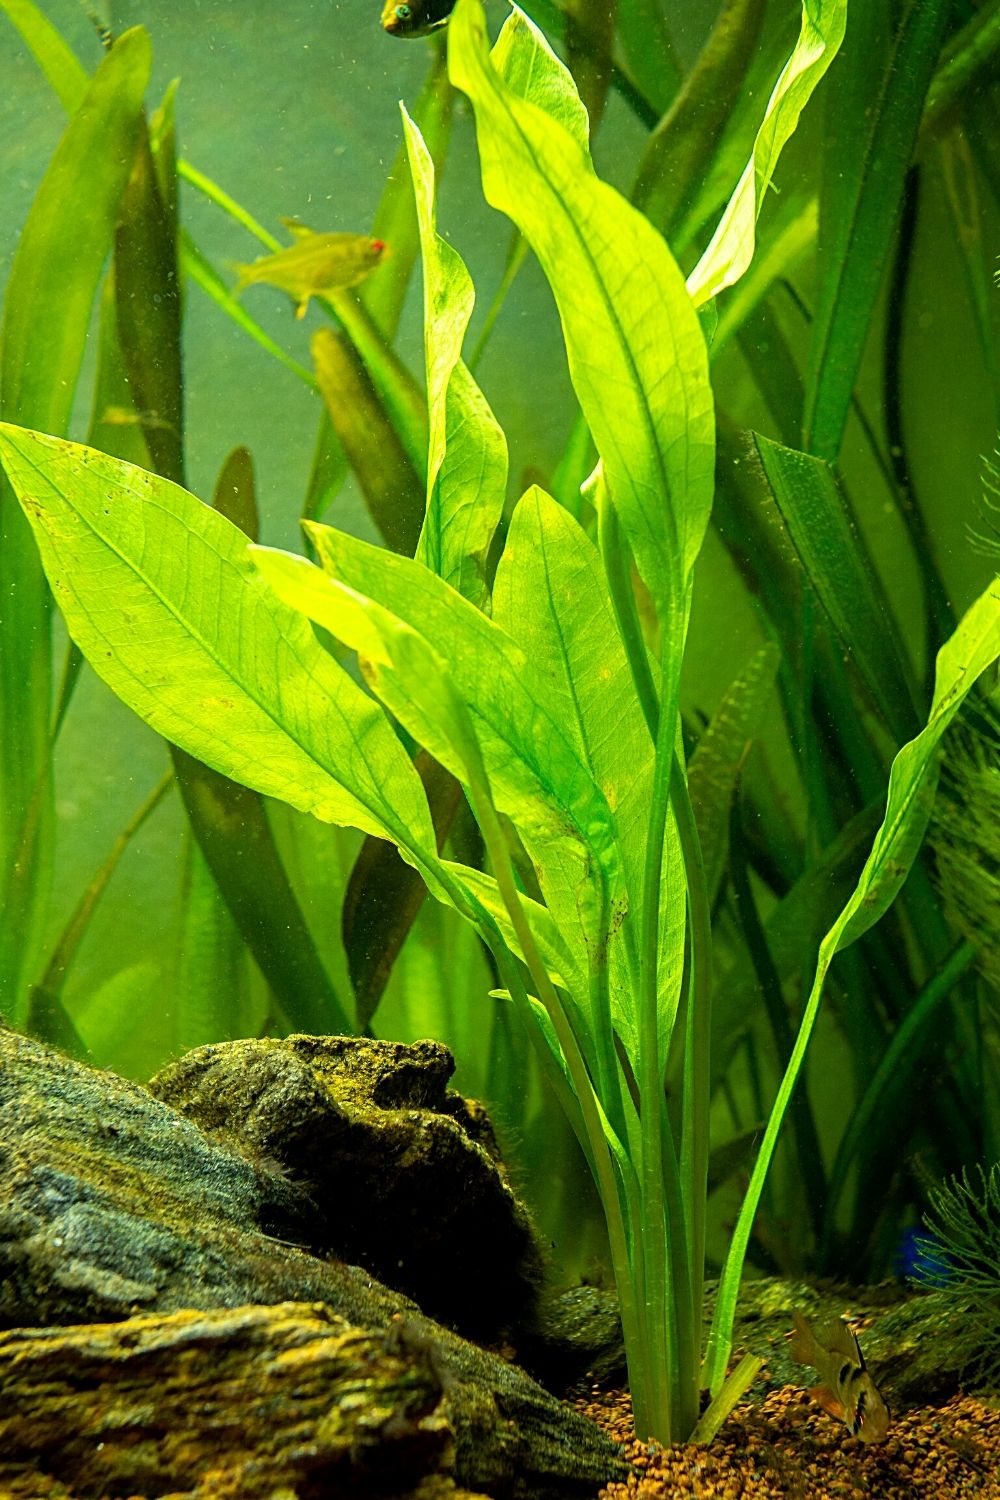 Amazon Sword is a very popular aquatic plant that you can grow for your betta fish's aquarium